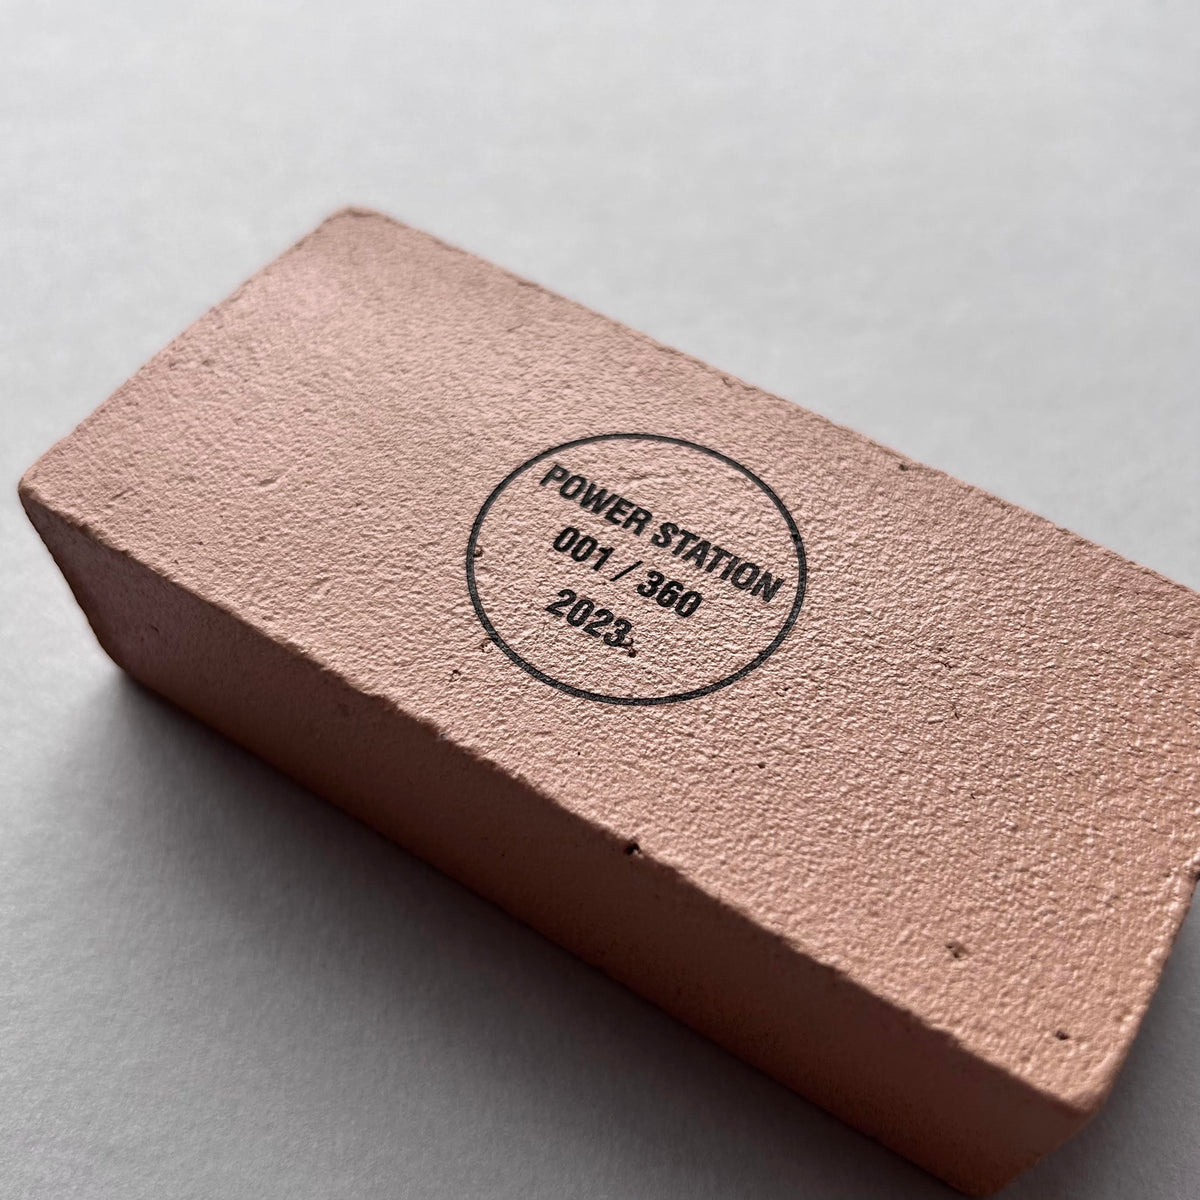 Cast Iron Brick by Brick Sixty - LIMITED EDITION